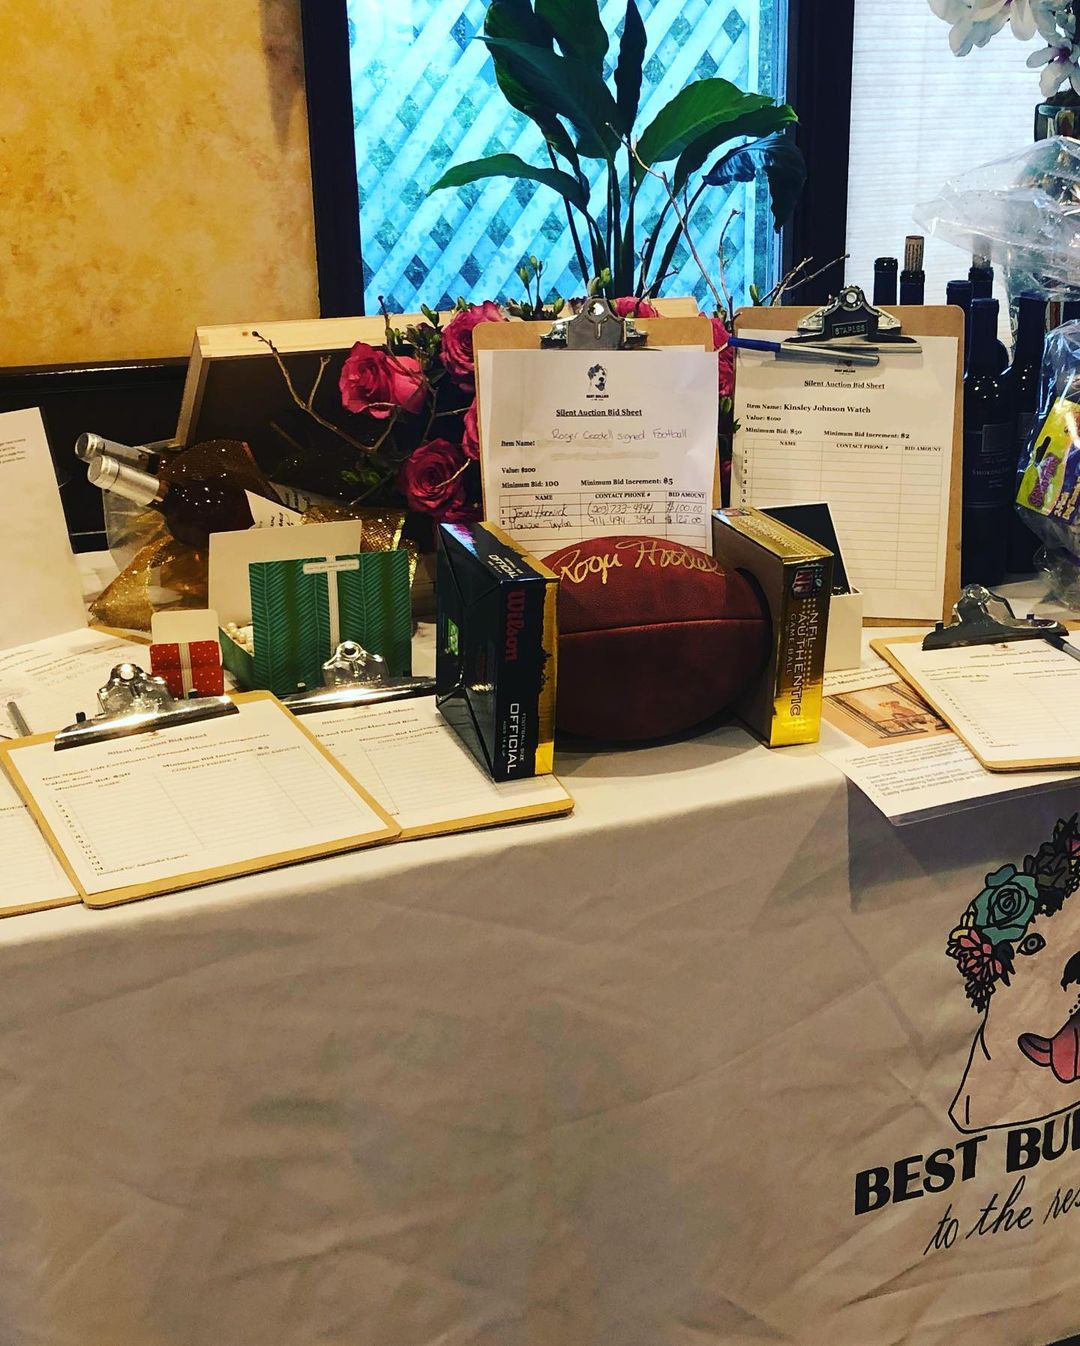 Thank you to everyone for coming out and celebrating with us! Our generous donors and sponsors made tonight’s auction and raffle such a success. Thank you from all of us here at Best Bullies for a wonderful 2019 Fundraiser! ❤️🐶